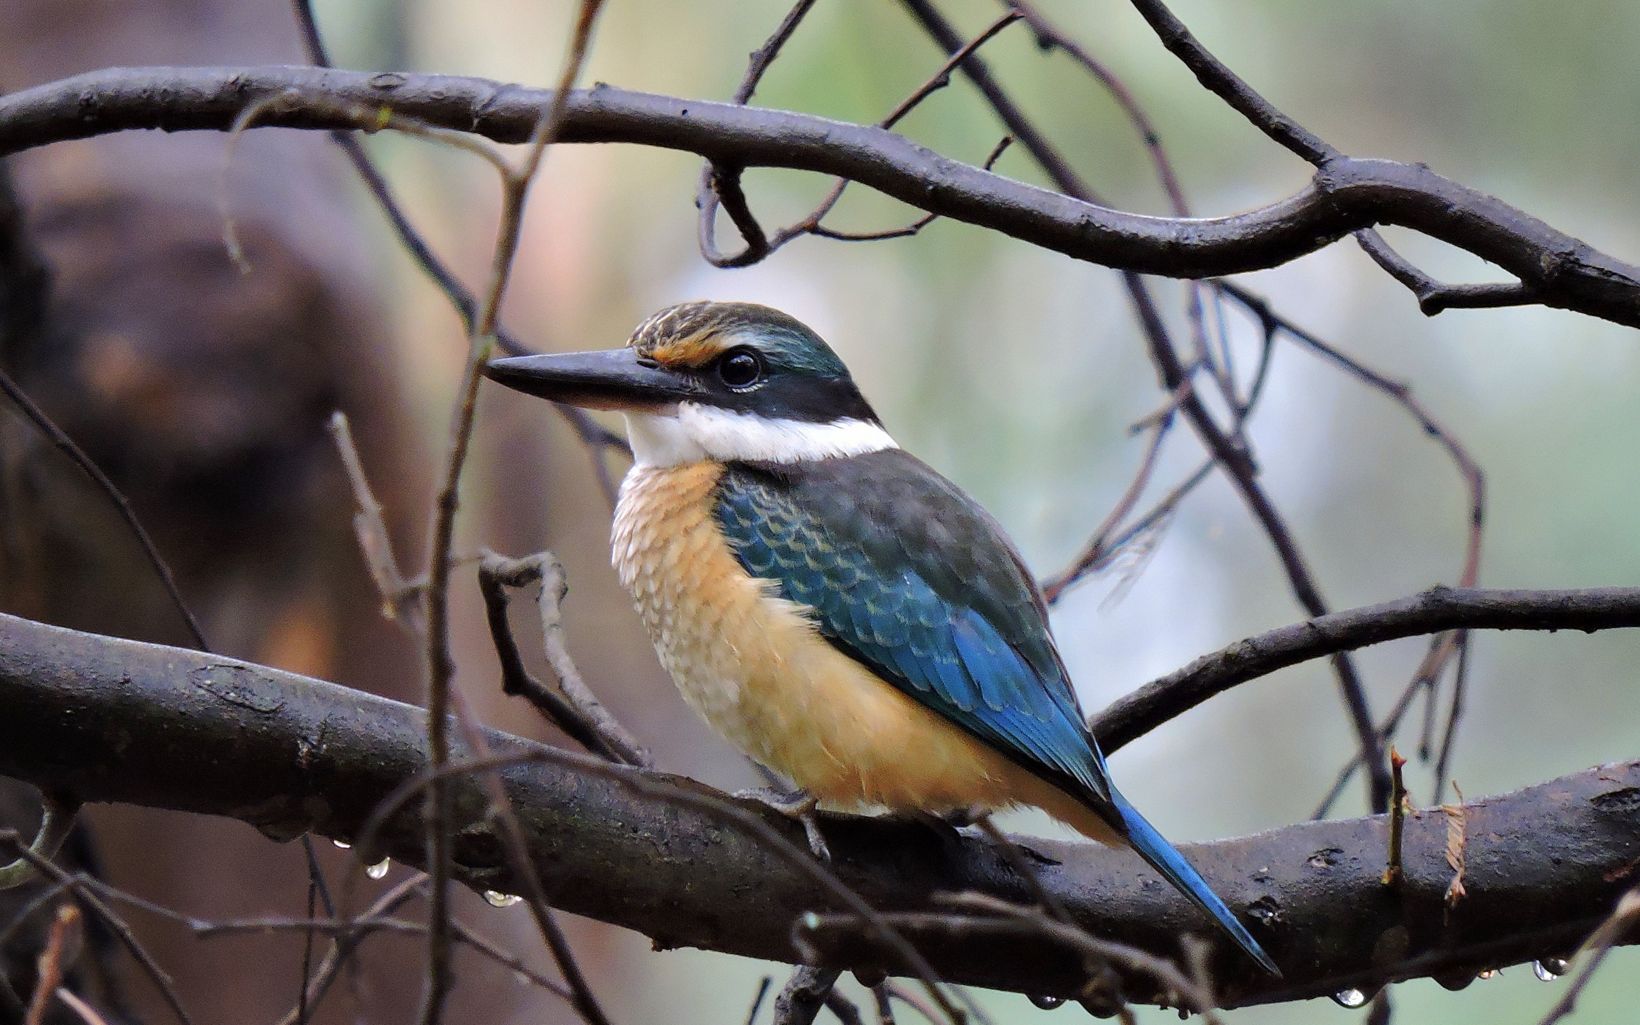 Australia is blessed with ten native species of kingfishers